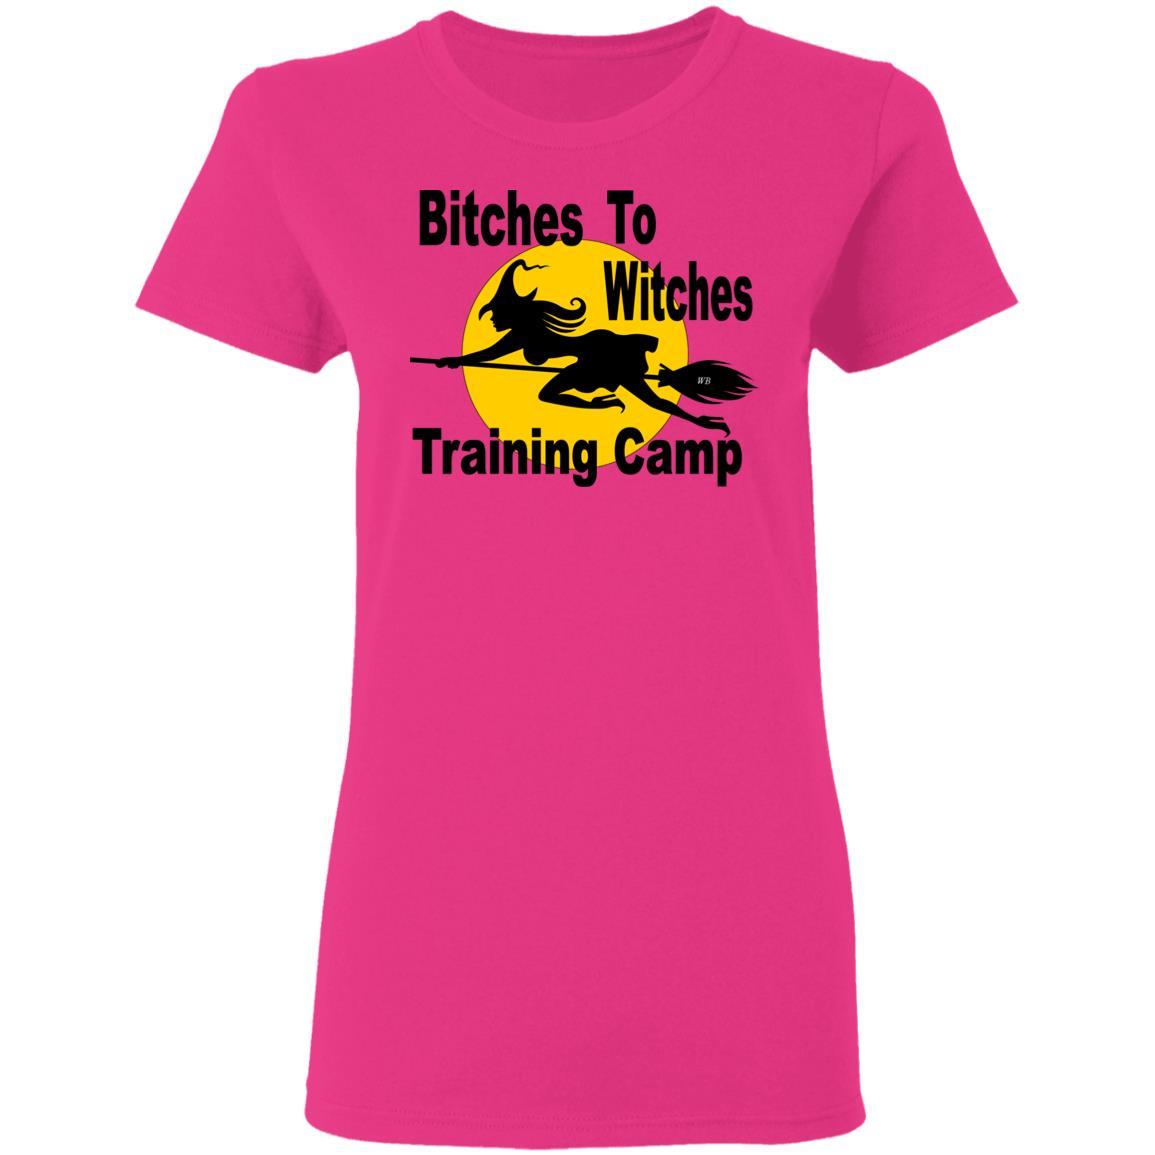 T-Shirts Heliconia / S WineyBitches.Co "Bitches To Witches Training Camp" Halloween Ladies' 5.3 oz. T-Shirt WineyBitchesCo